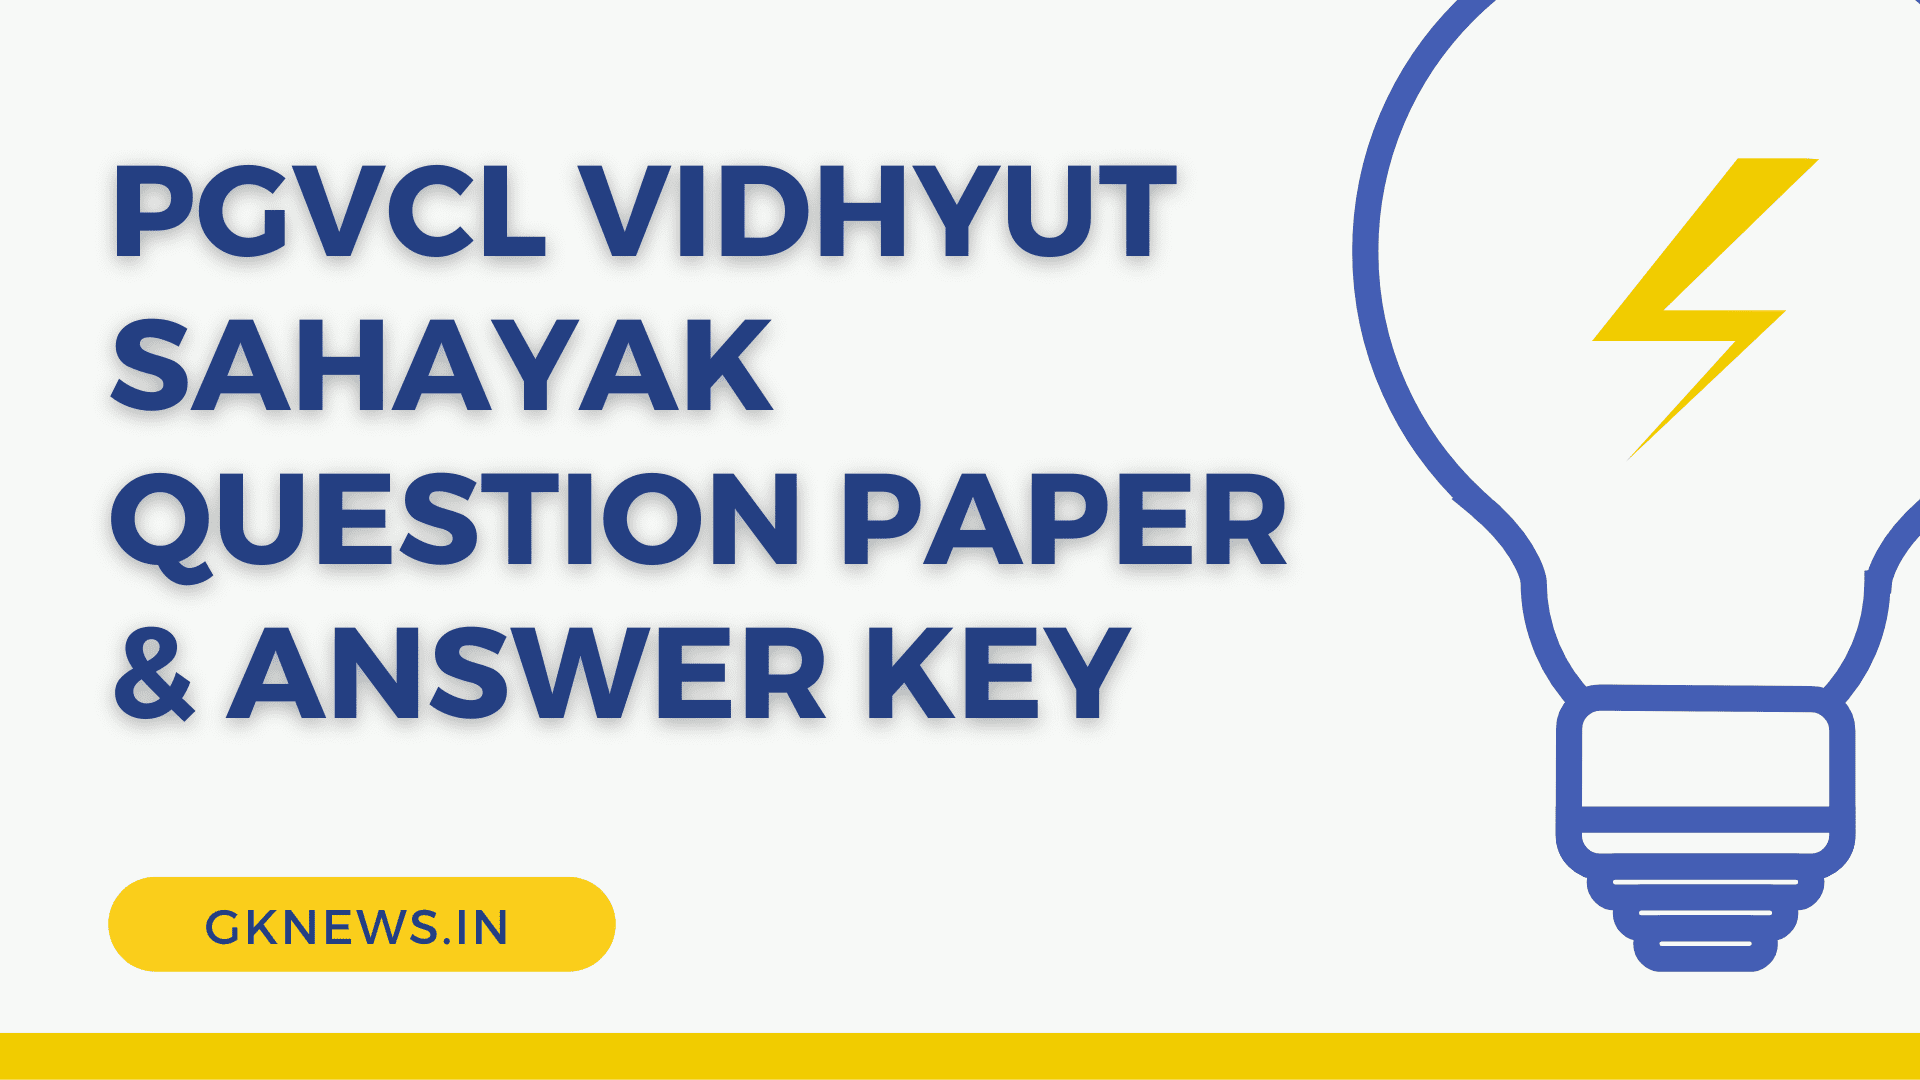 PGVCL Vidhyut Sahayak (Electrical Assistant) Question Paper and Answer Key 2023